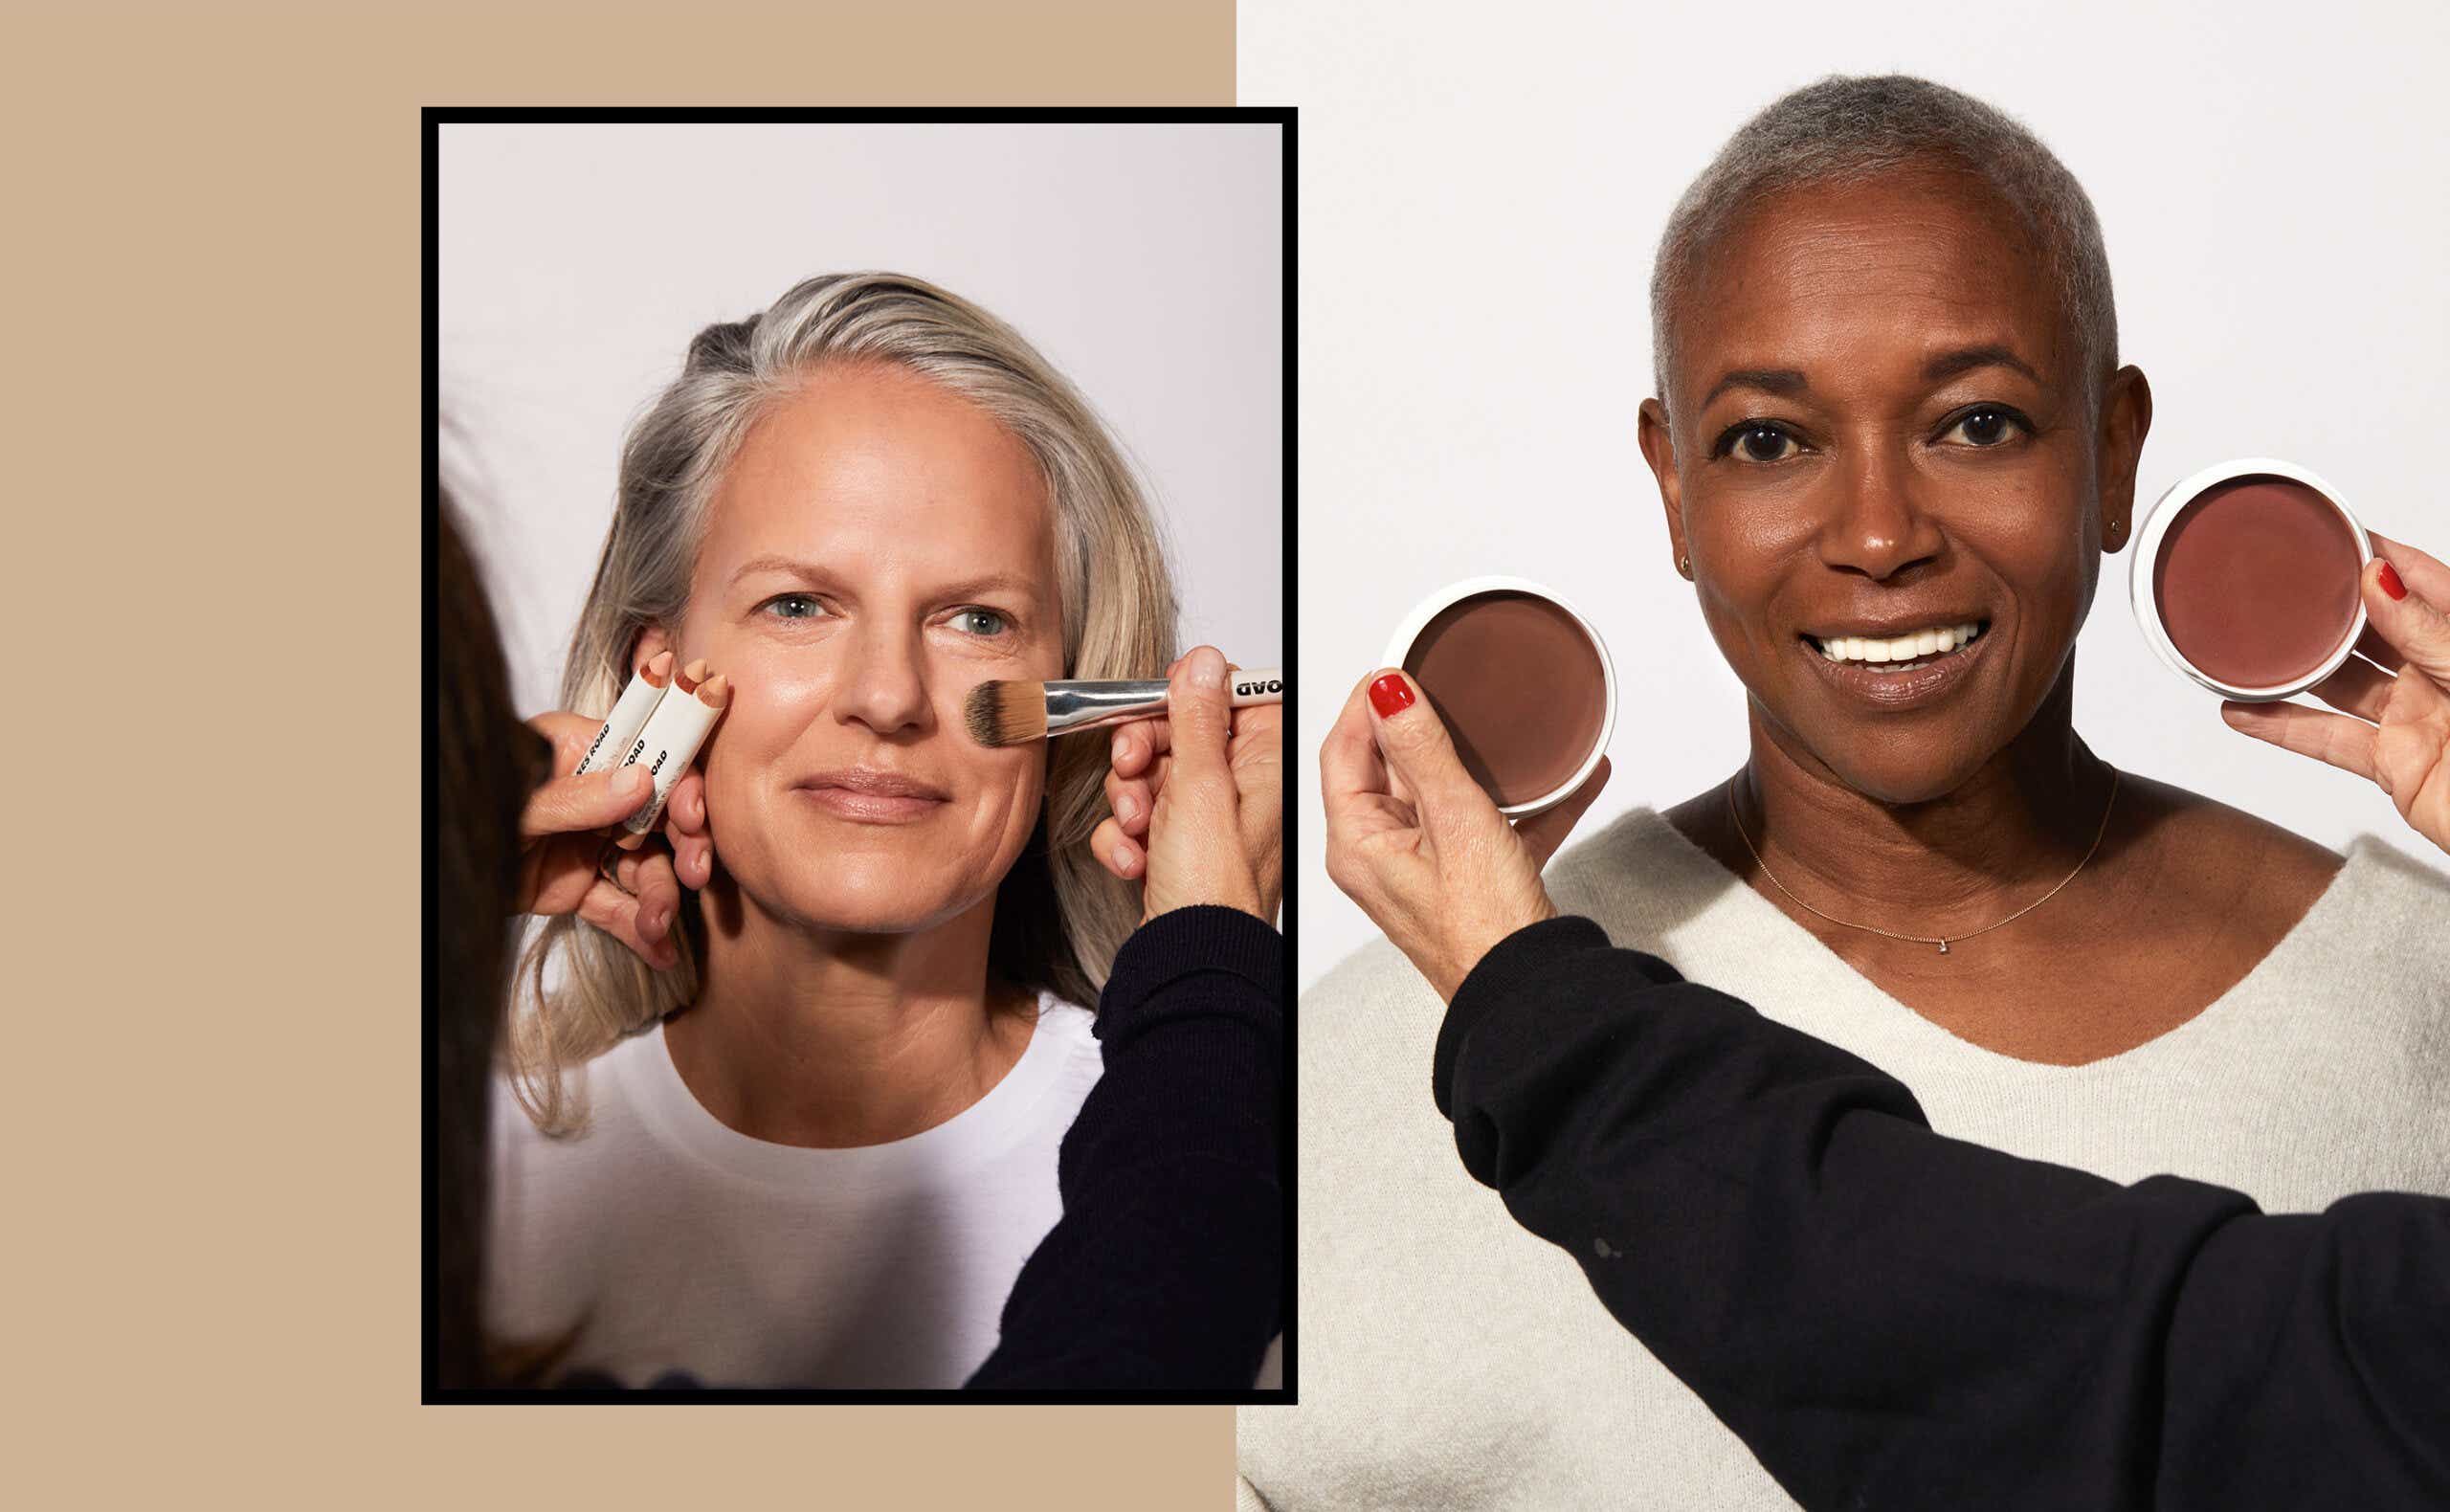 https://katiecouric.com/wp-content/uploads/2022/04/Makeup-tips-for-women-over-50-scaled.jpg